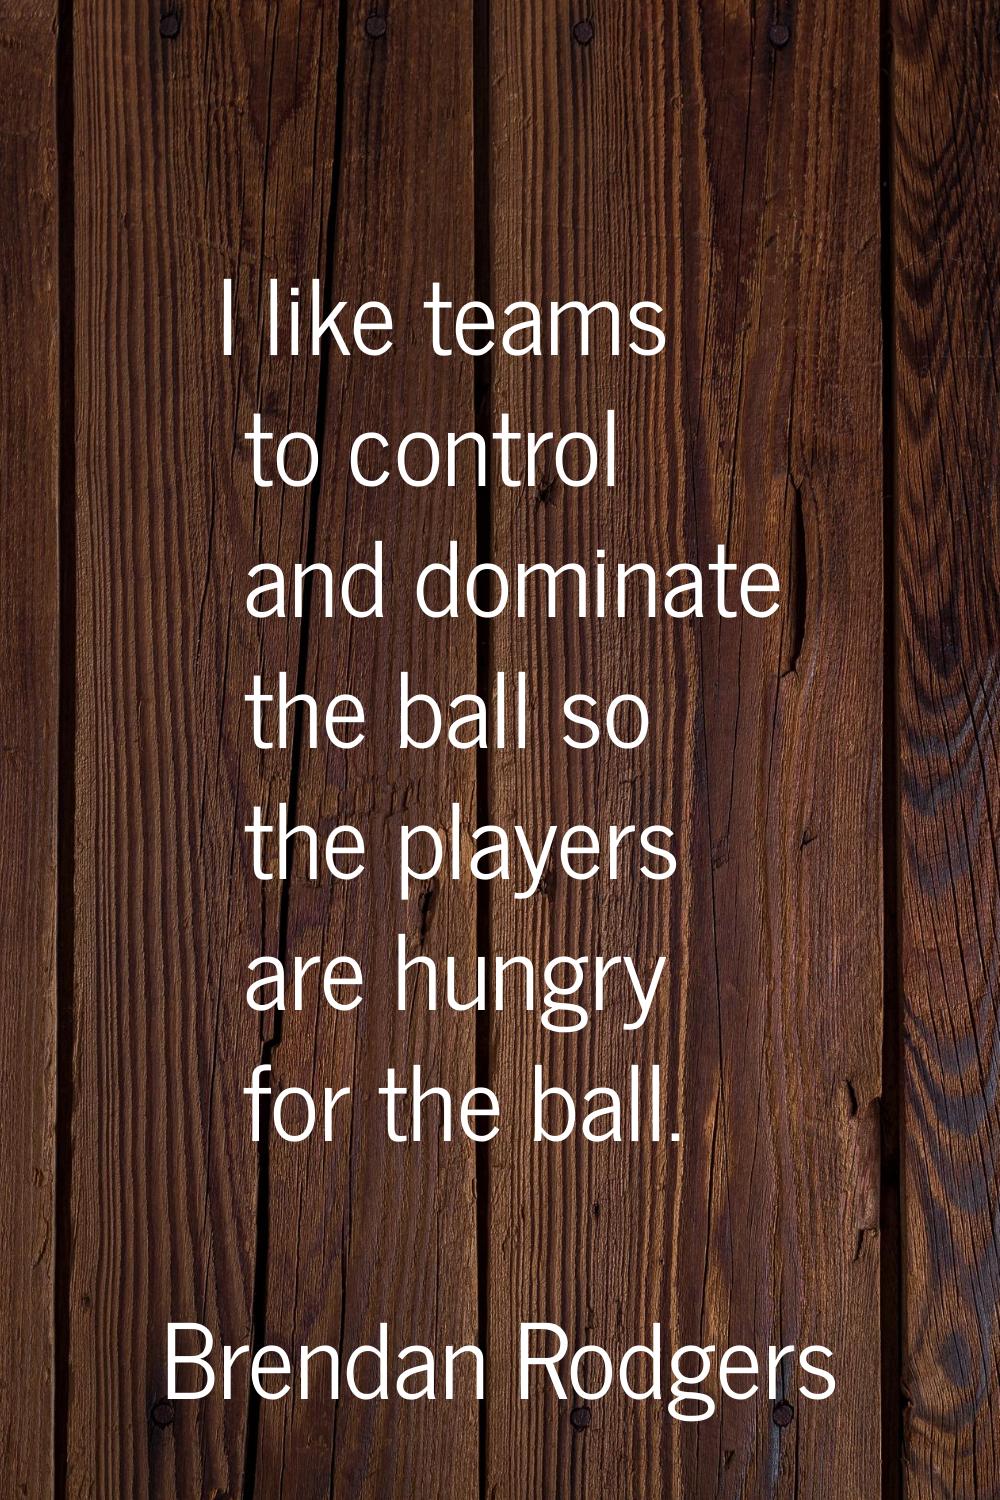 I like teams to control and dominate the ball so the players are hungry for the ball.